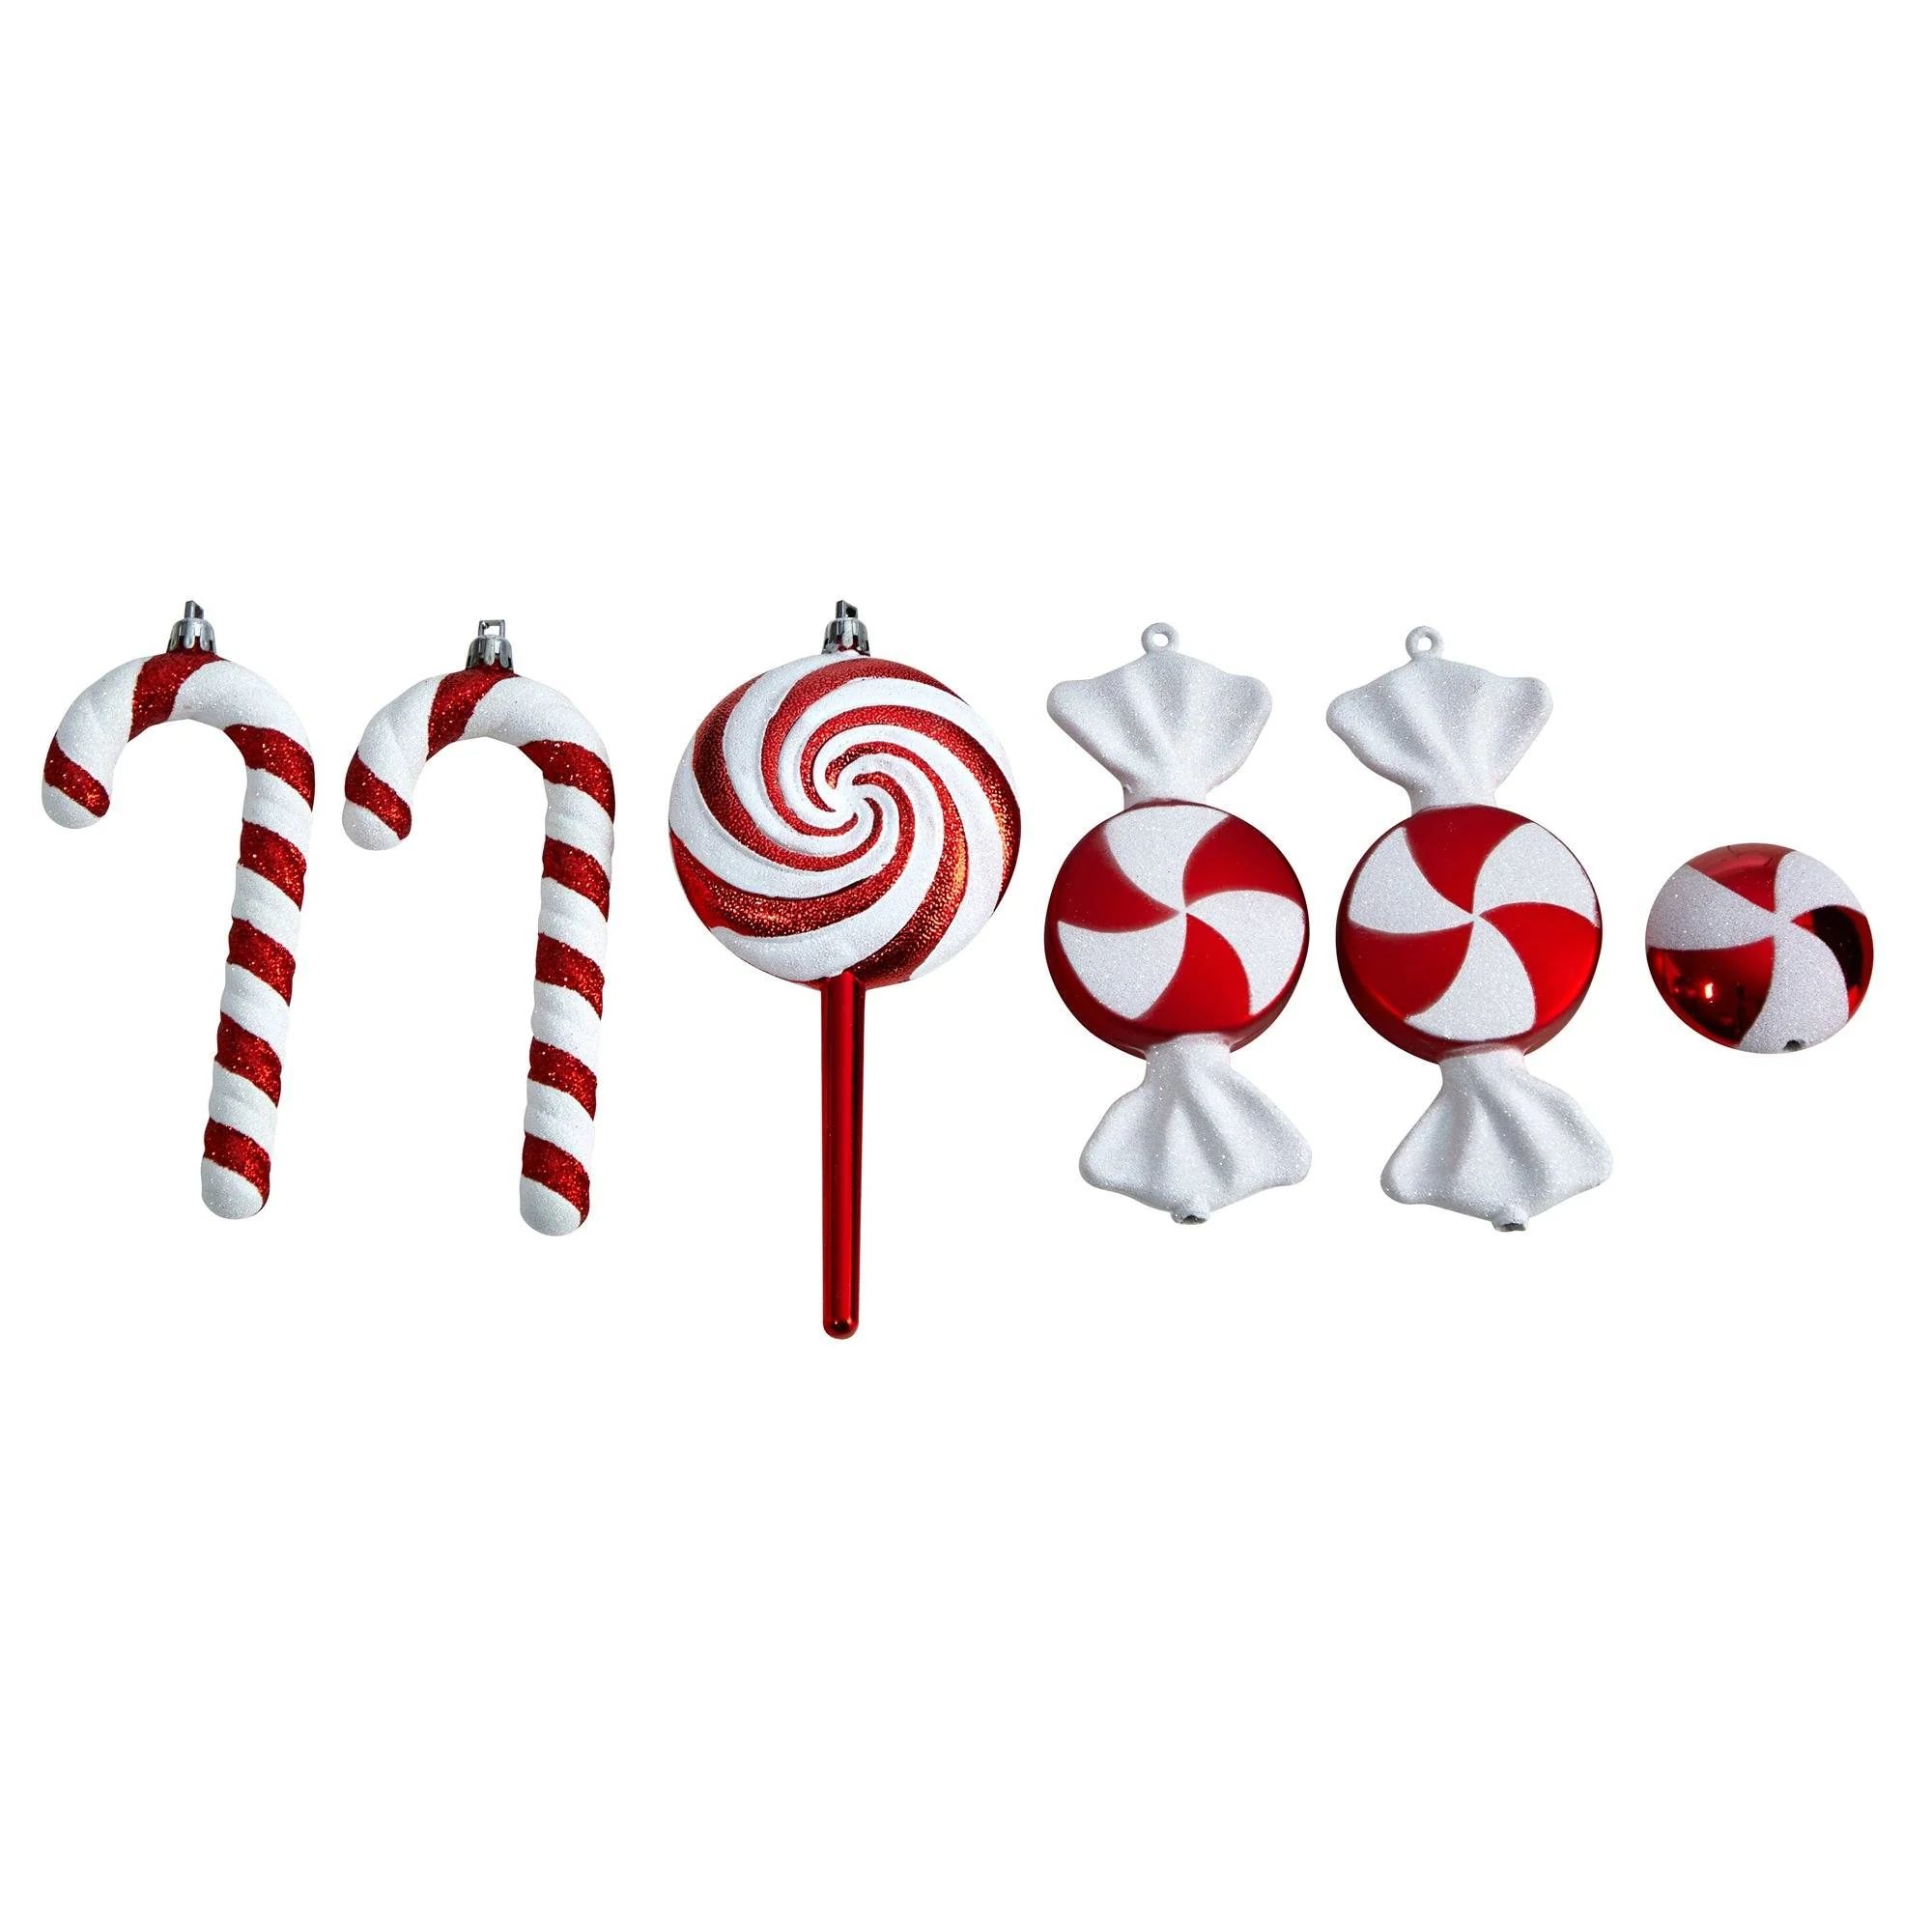 7” Assorted Candy Cane Holiday Christmas Deluxe Shatterproof Ornament Set of 6 | Nearly Natural